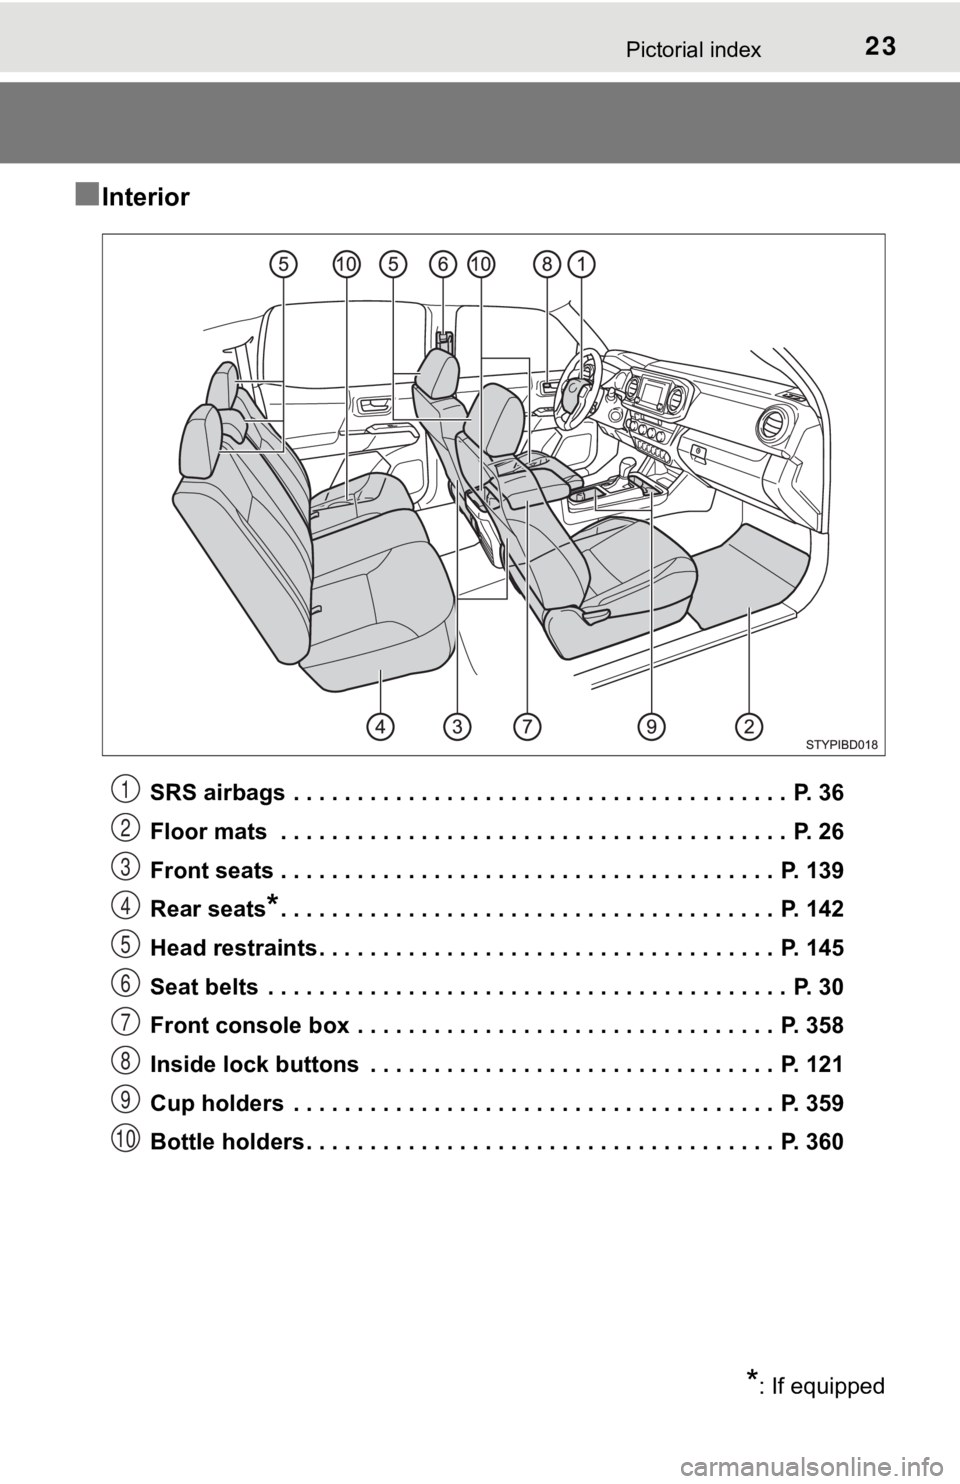 TOYOTA TUNDRA 2022  Owners Manual 23Pictorial index
■Interior
SRS airbags  . . . . . . . . . . . . . . . . . . . . . . . . . . . . . . . . . . . . . . .  P. 36
Floor mats  . . . . . . . . . . . . . . . . . . . . . . . . . . . . . . 